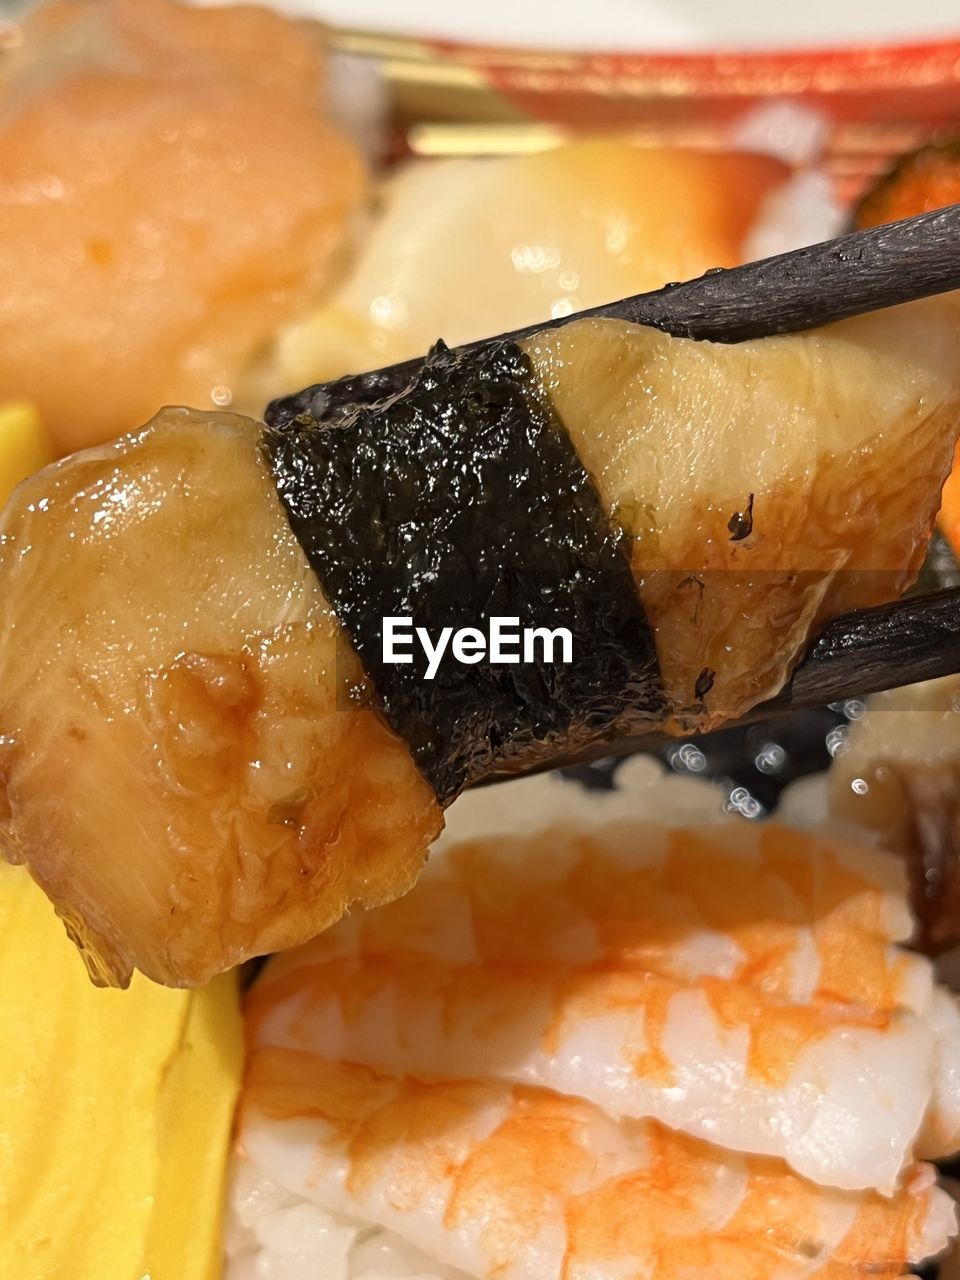 food and drink, food, cuisine, freshness, sushi, asian food, dish, healthy eating, seafood, wellbeing, japanese cuisine, japanese food, close-up, indoors, fish, no people, rice, still life, culture, meal, serving size, california roll